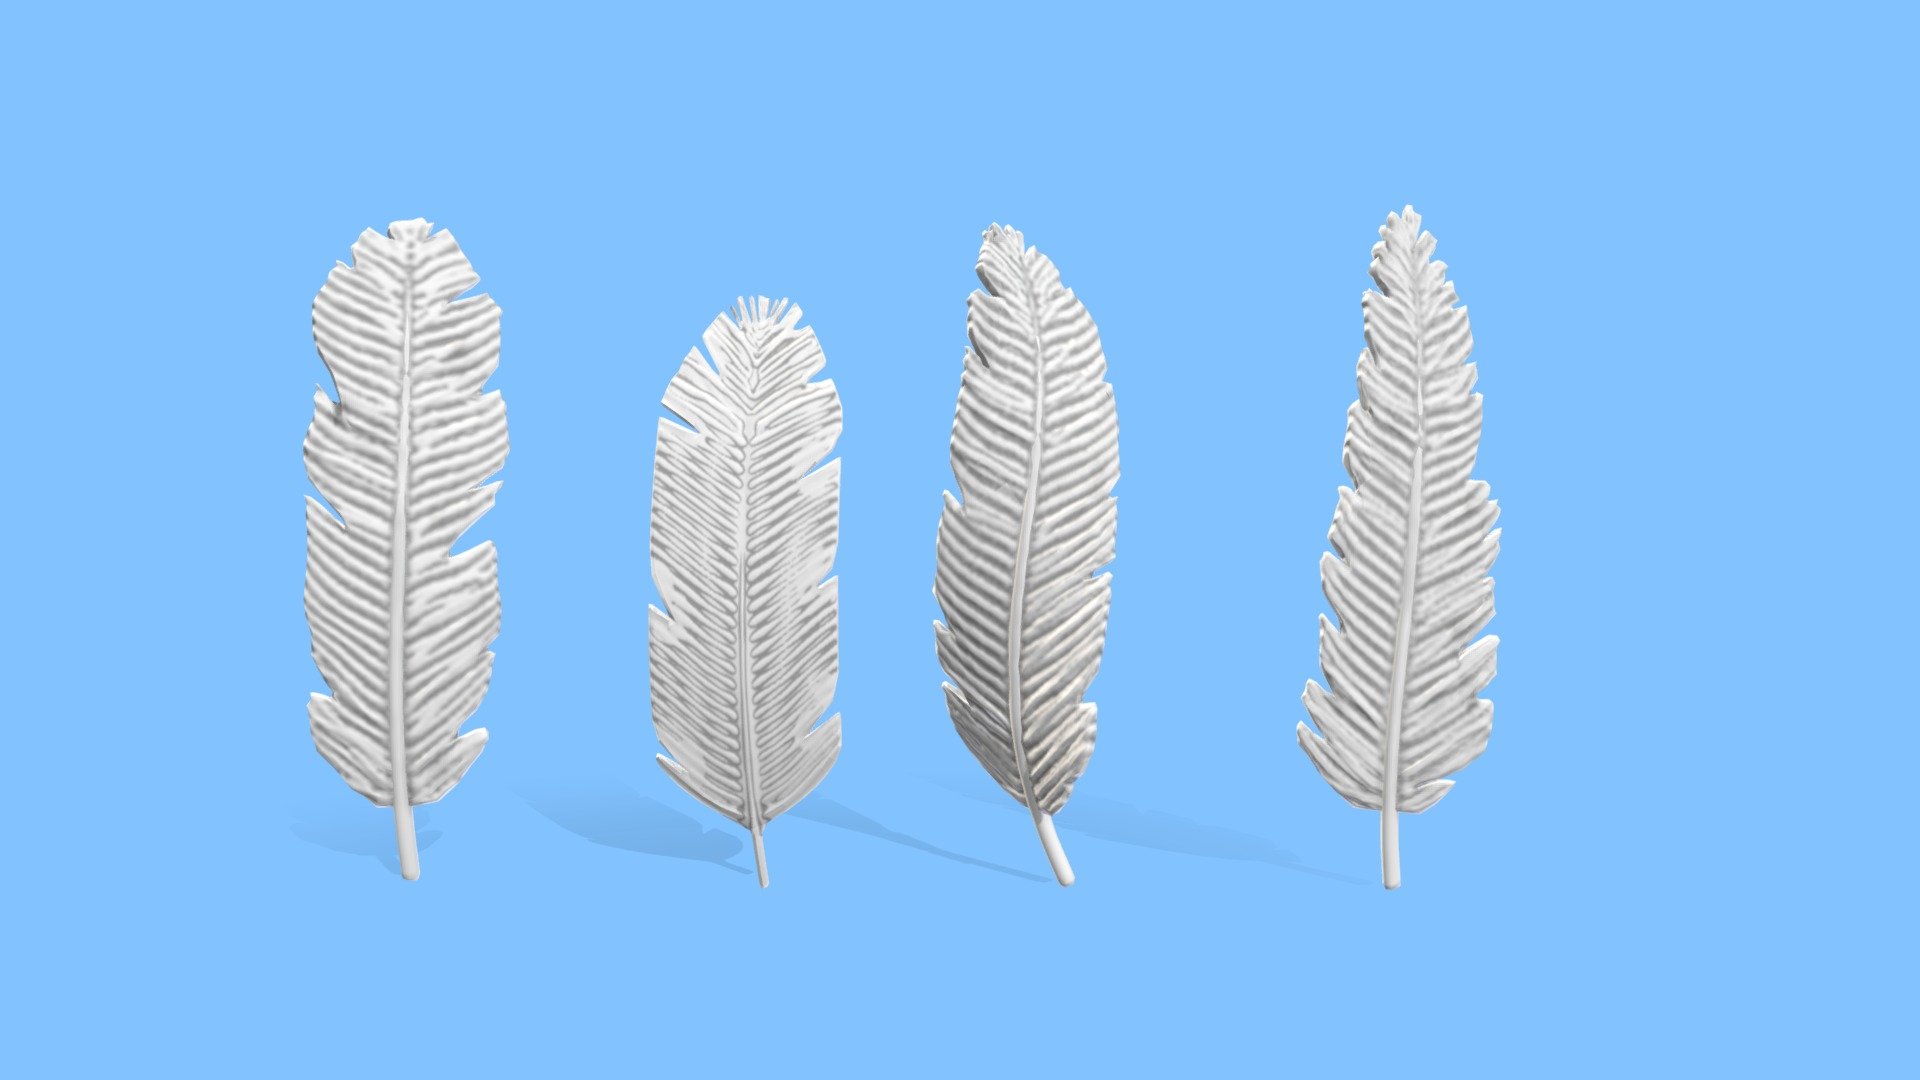 &ldquo;Enhance your virtual world with these enchanting 3D Stylized Feathers! Meticulously crafted with a low poly count, these exquisite feathers bring a touch of magic to any scene or character. The intricately designed textures and vibrant colors evoke a whimsical feel, making them ideal for games, animations, and art projects. Immerse your audience in a world of wonder and grace, and let these graceful feathers take flight in your creations.